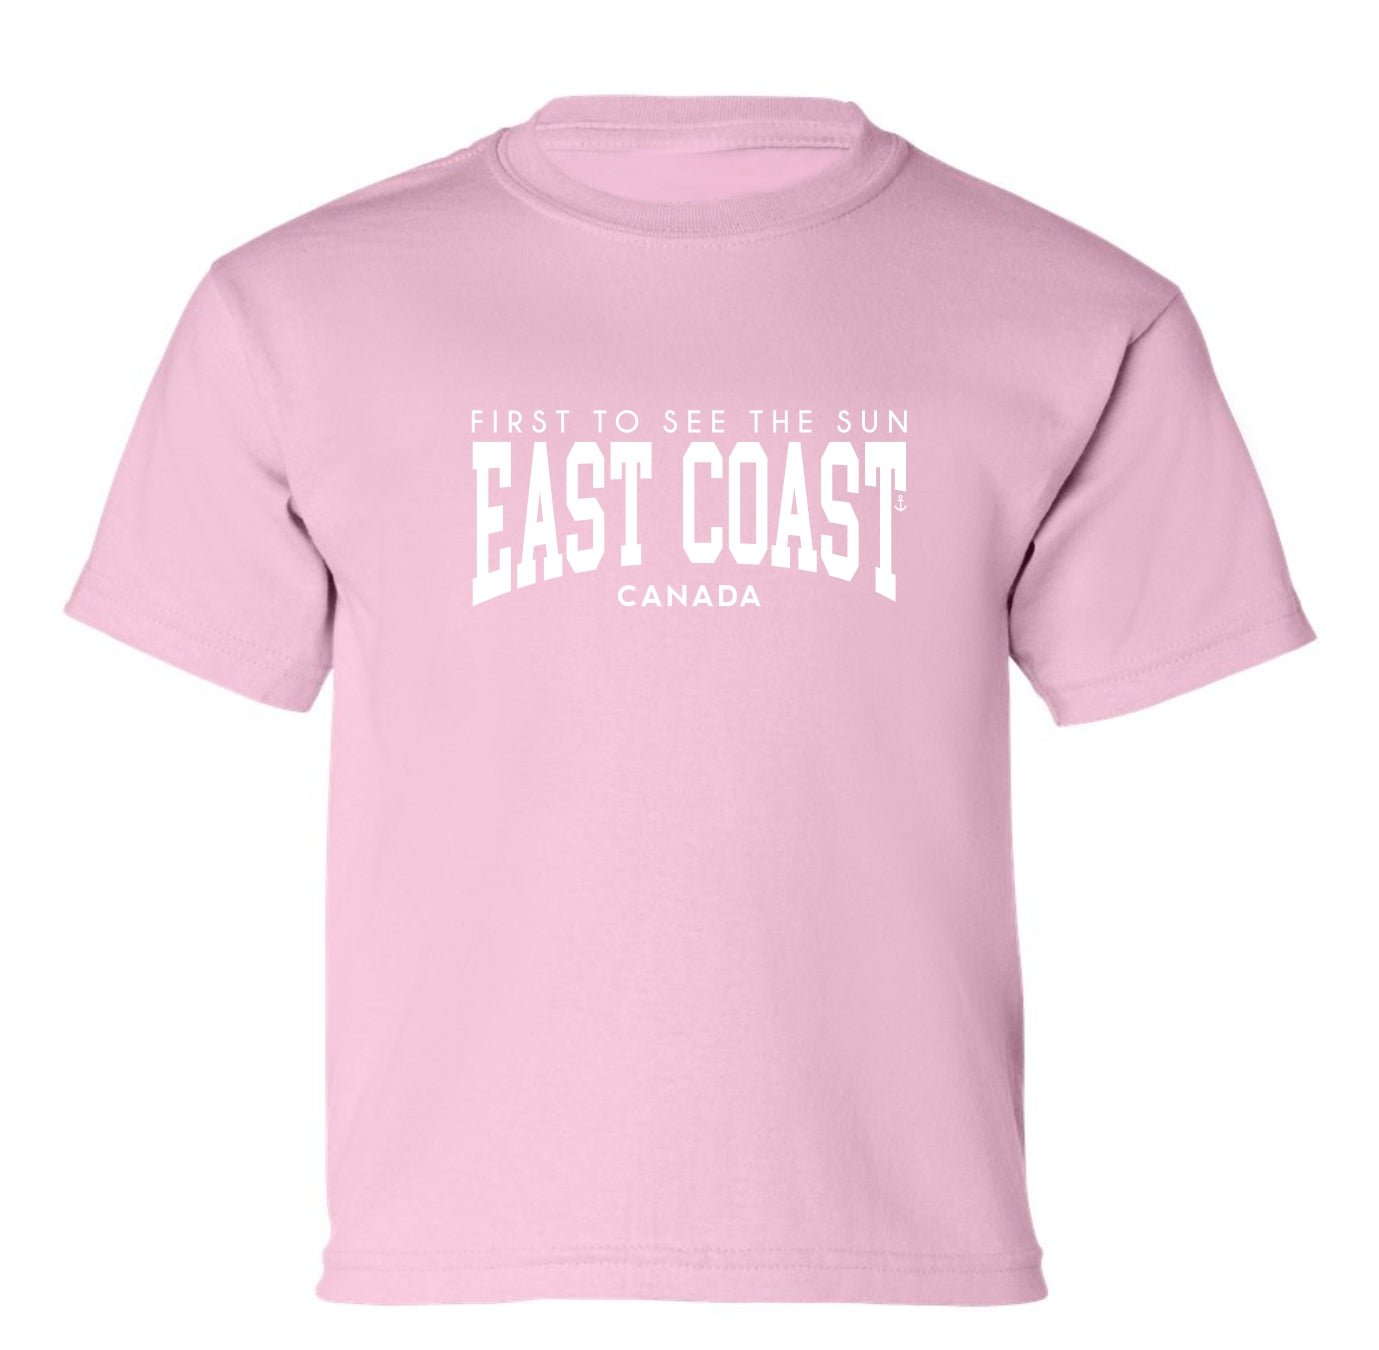 "East Coast - First To See The Sun" Toddler/Youth T-Shirt